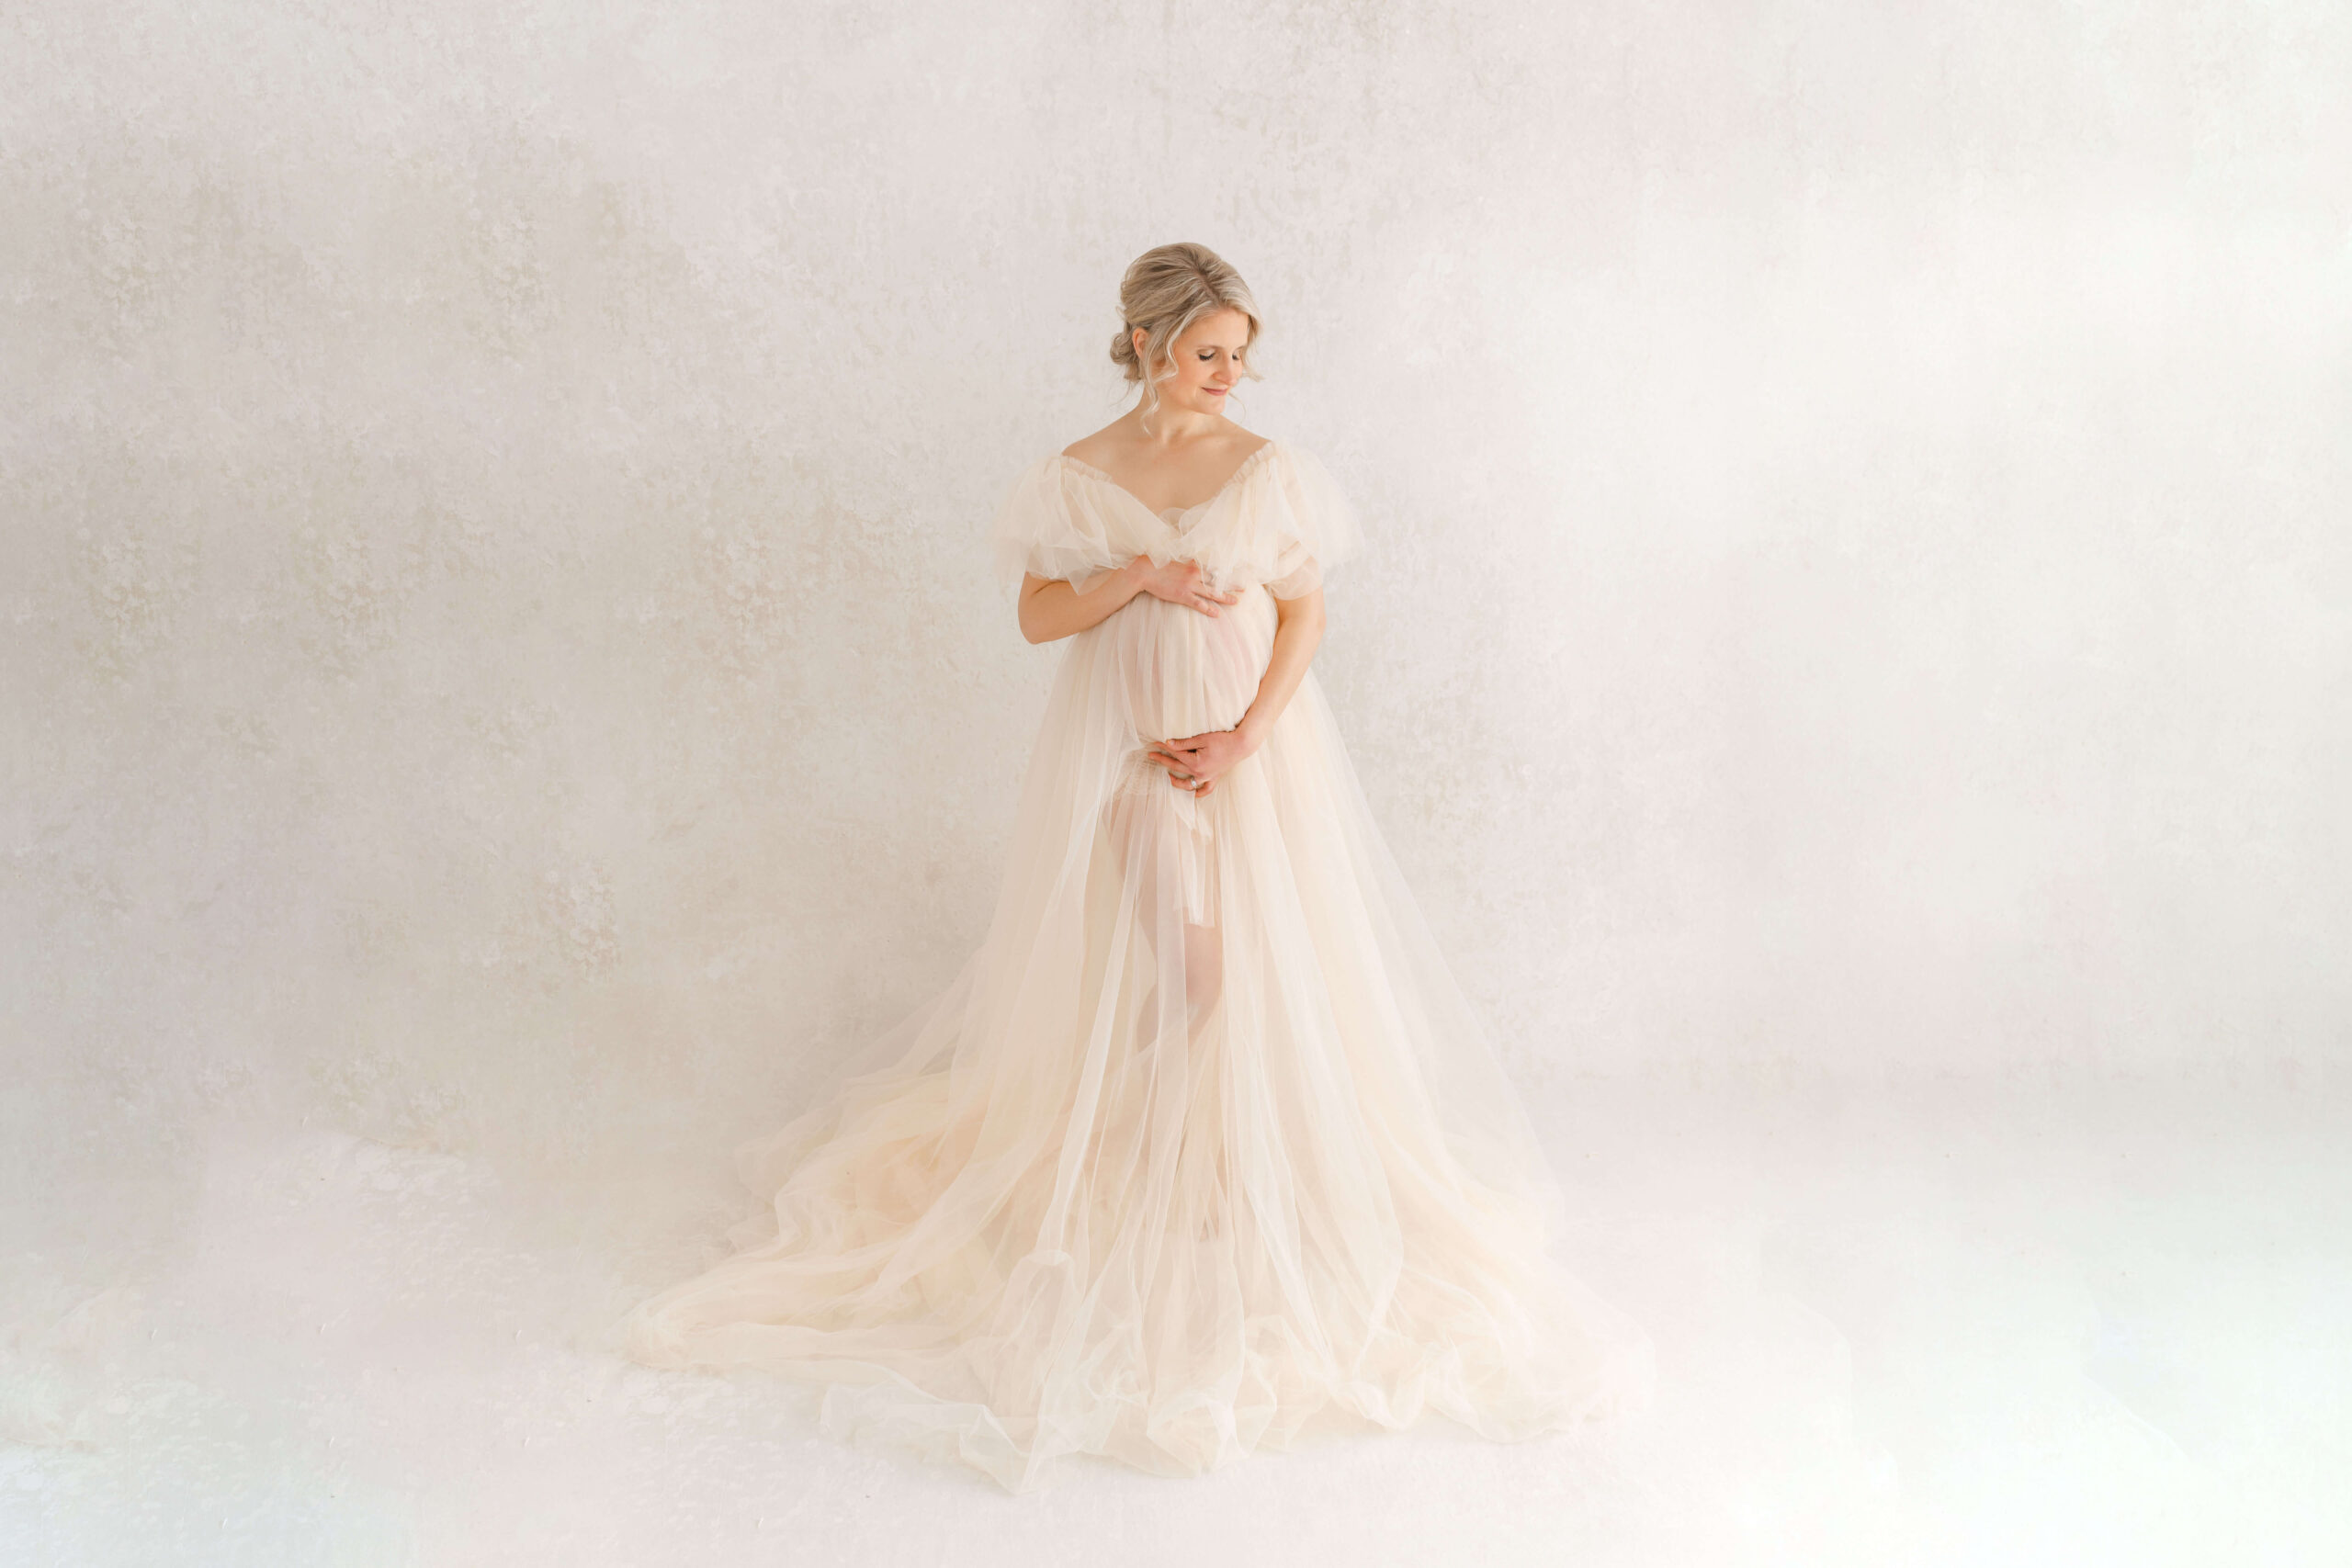 glamorous maternity photoshoot with custom tulle maternity gown against hand painted backdrop by JRD artshop